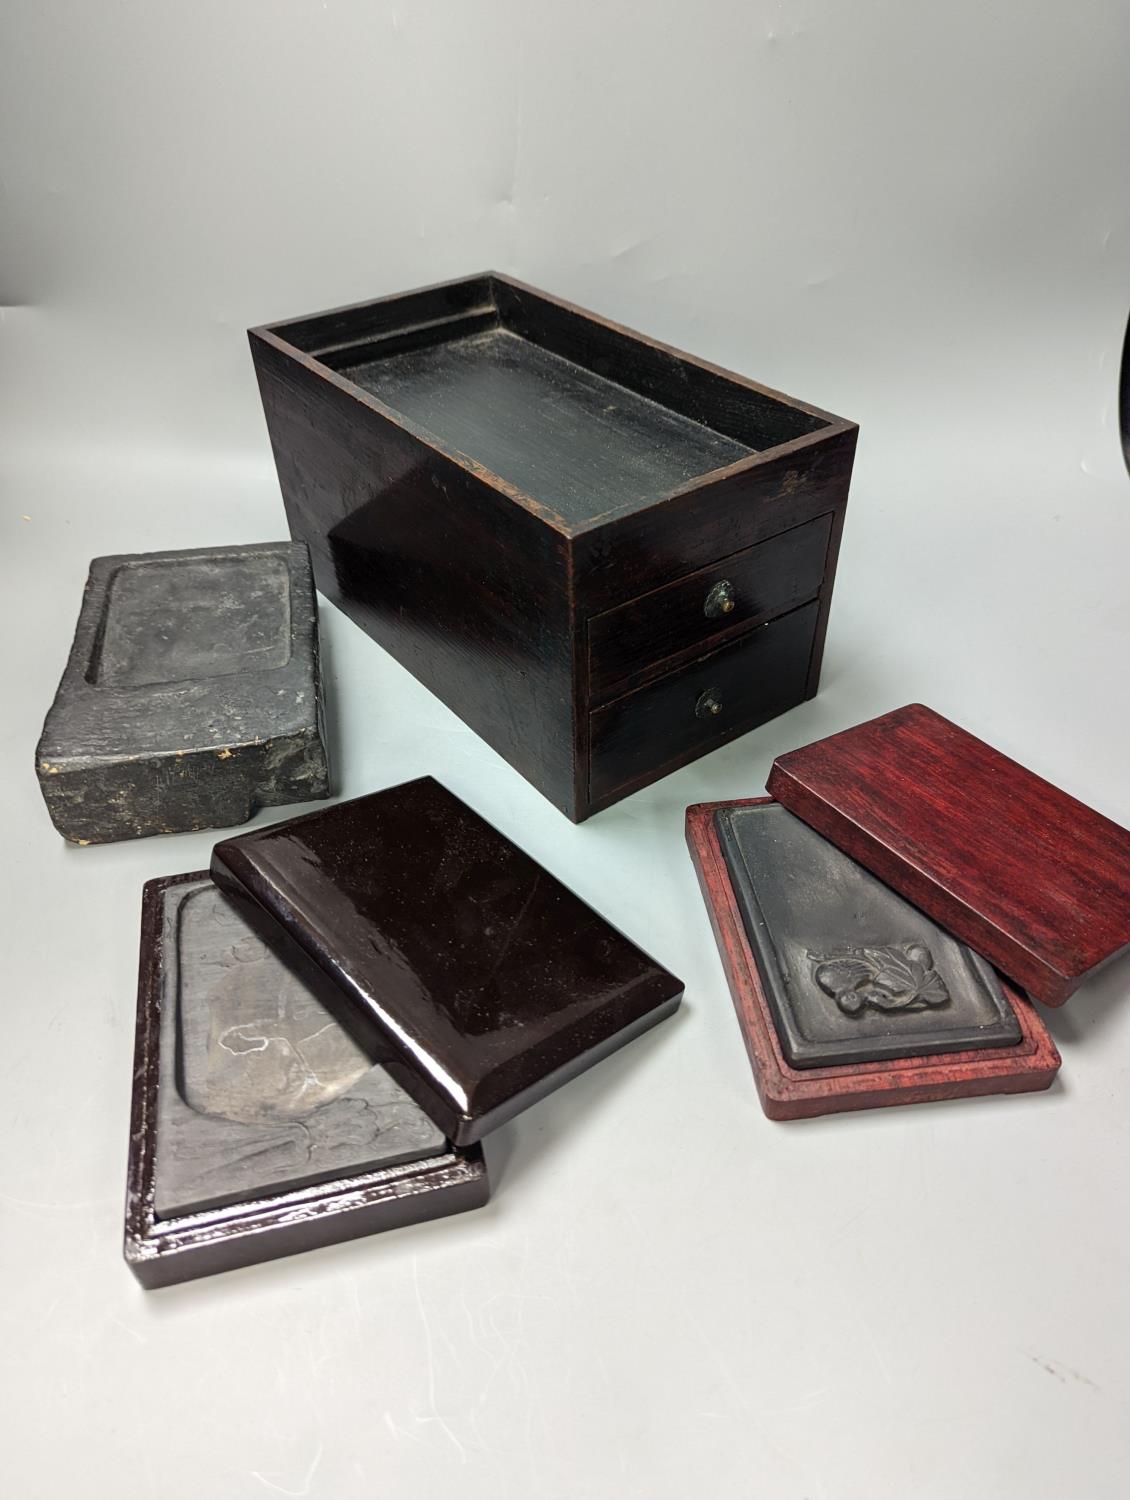 Three Chinese ink-stones, two in fitted boxes and a Japanese writing box,box 26 cms deep 14-5 wide.